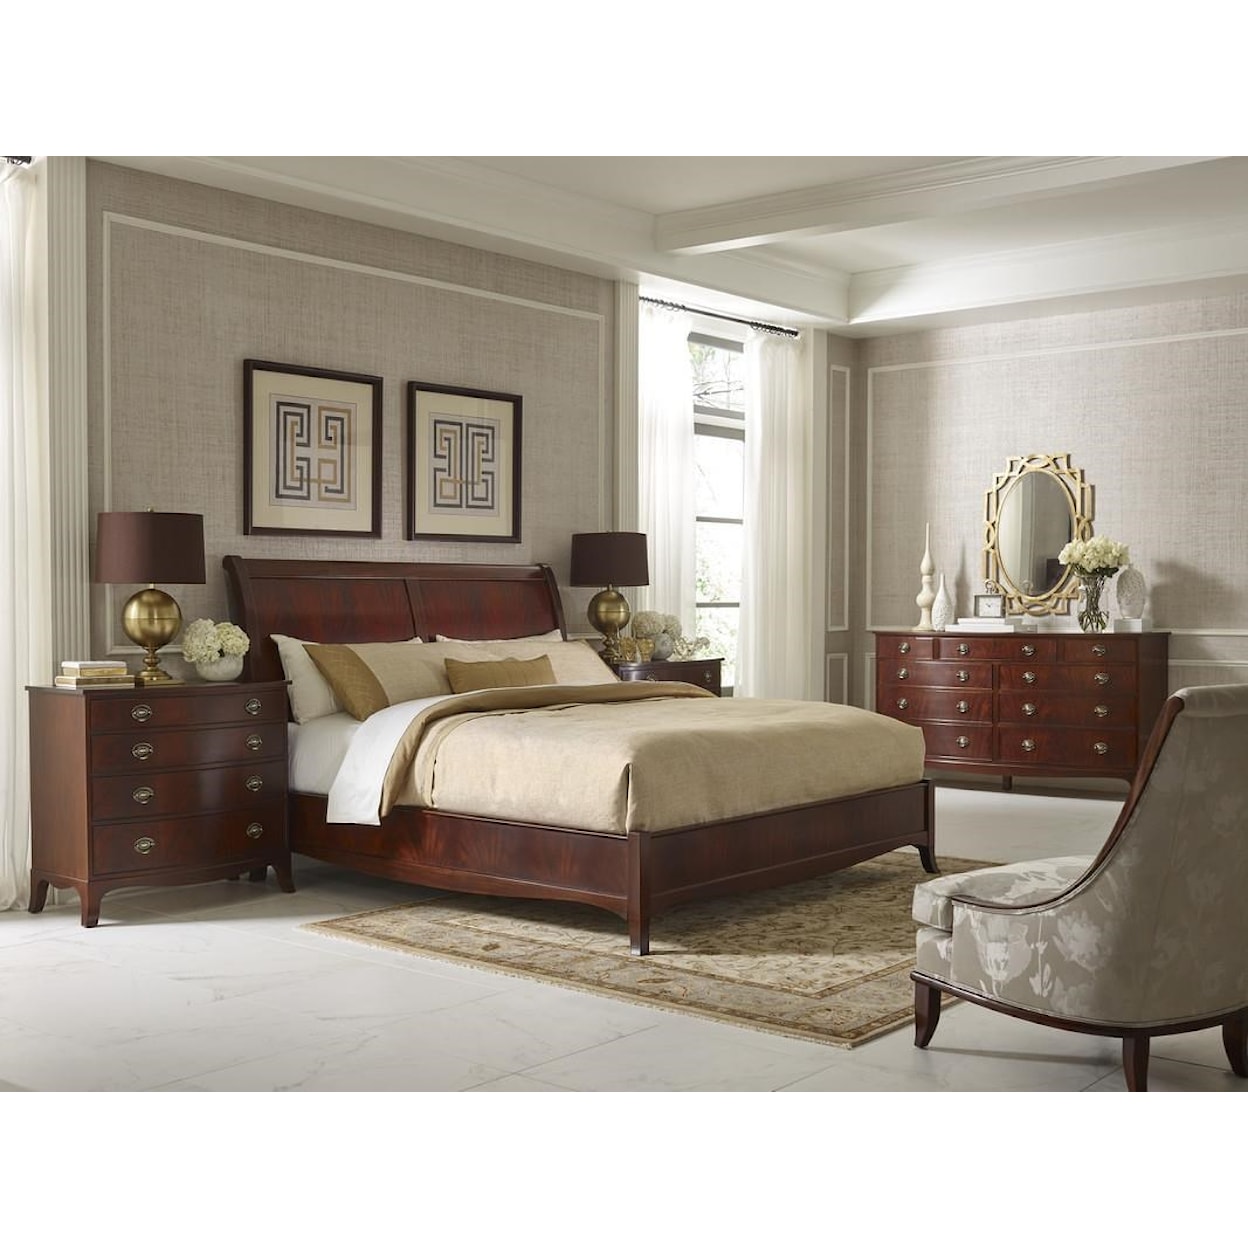 Stickley Classics Cherry and Mahogany Whitehall Sleigh Bed